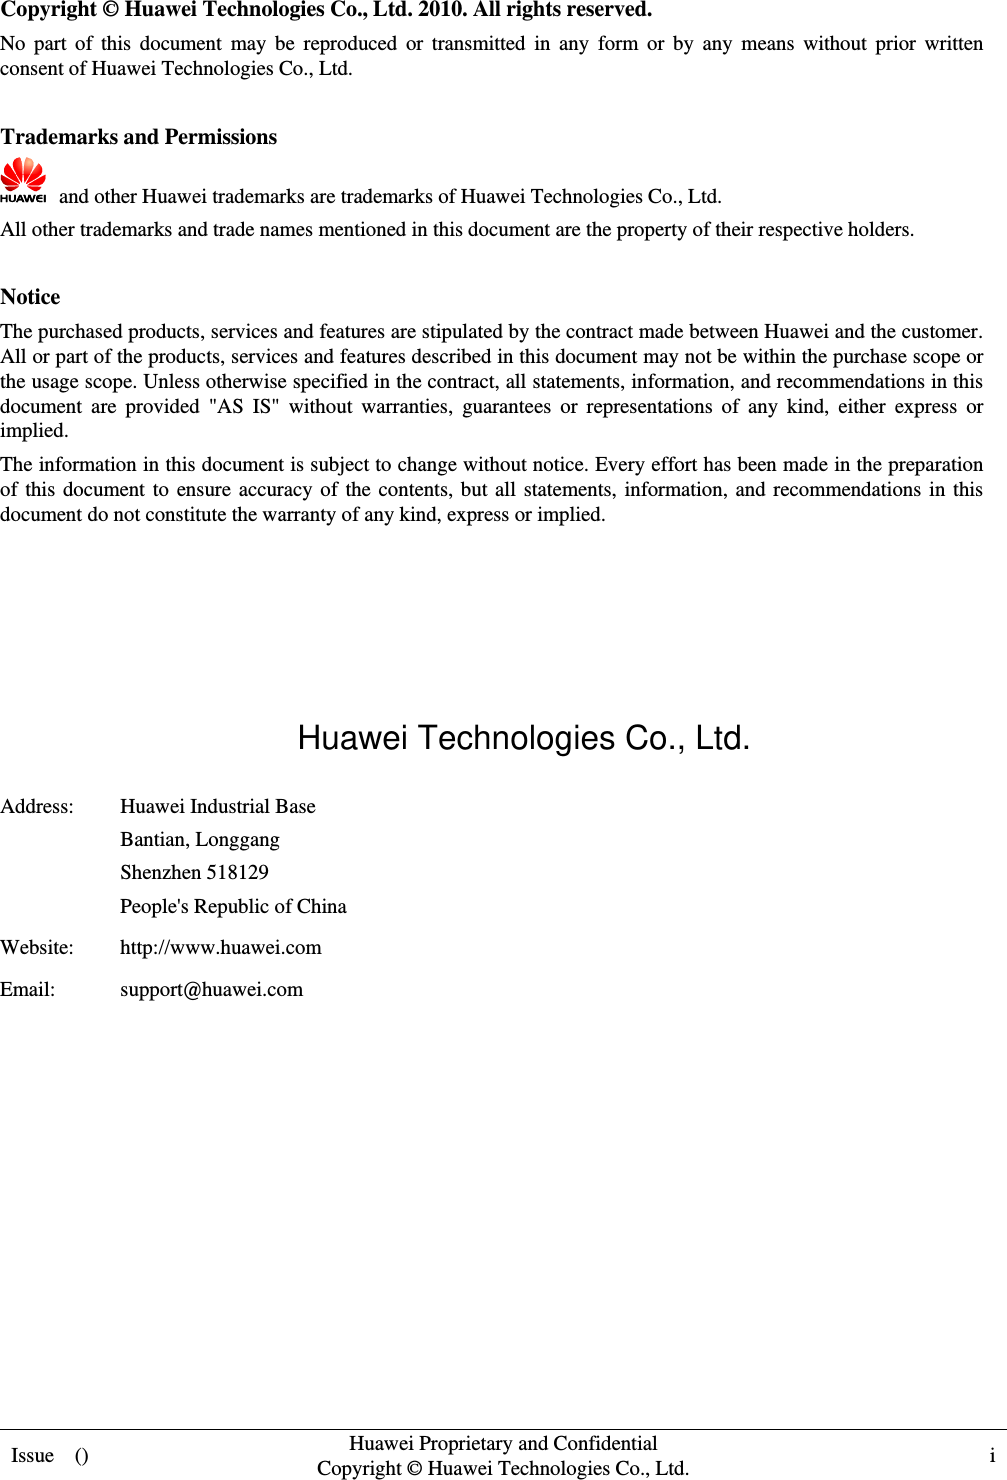  Issue  ()  Huawei Proprietary and Confidential         Copyright © Huawei Technologies Co., Ltd. i  Copyright © Huawei Technologies Co., Ltd. 2010. All rights reserved. No part of this document may be reproduced or transmitted in any form or by any means without prior written consent of Huawei Technologies Co., Ltd.  Trademarks and Permissions   and other Huawei trademarks are trademarks of Huawei Technologies Co., Ltd. All other trademarks and trade names mentioned in this document are the property of their respective holders.  Notice The purchased products, services and features are stipulated by the contract made between Huawei and the customer. All or part of the products, services and features described in this document may not be within the purchase scope or the usage scope. Unless otherwise specified in the contract, all statements, information, and recommendations in this document are provided &quot;AS IS&quot; without warranties, guarantees or representations of any kind, either express or implied. The information in this document is subject to change without notice. Every effort has been made in the preparation of this document to ensure accuracy of the contents, but all statements, information, and recommendations in this document do not constitute the warranty of any kind, express or implied.     Huawei Technologies Co., Ltd. Address: Huawei Industrial Base Bantian, Longgang Shenzhen 518129 People&apos;s Republic of China Website: http://www.huawei.com Email: support@huawei.com          